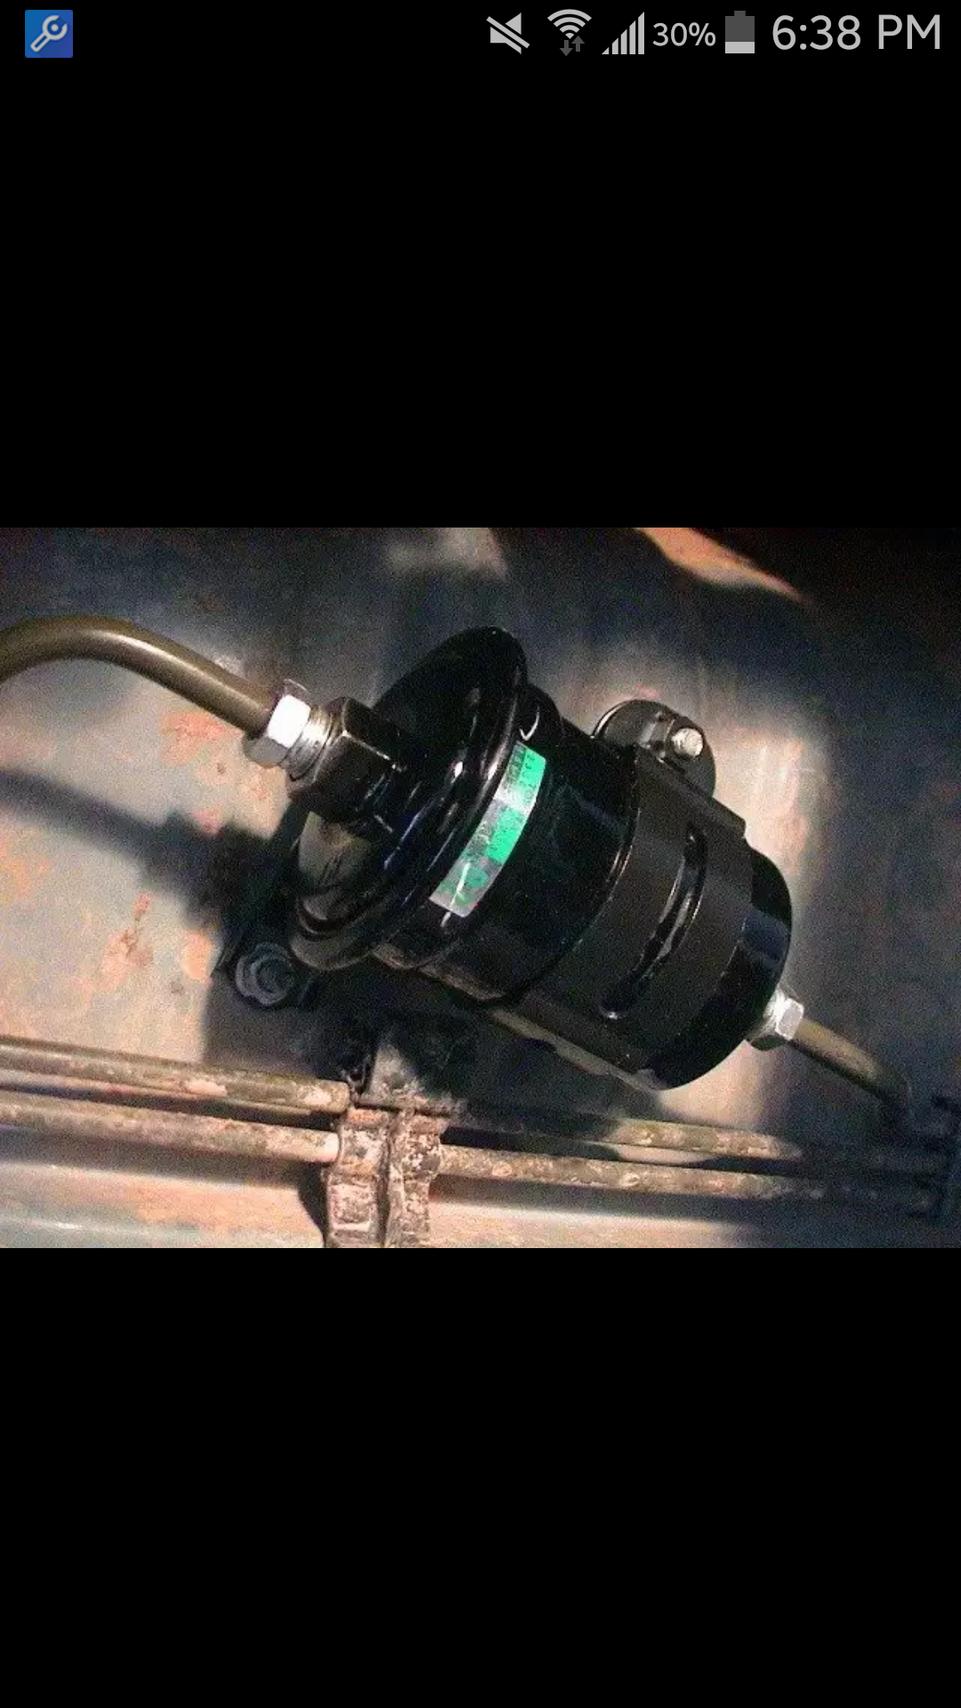 Changed fuel filter and now it's leaking like crazy-screenshot_2017-09-03-18-38-50-jpg